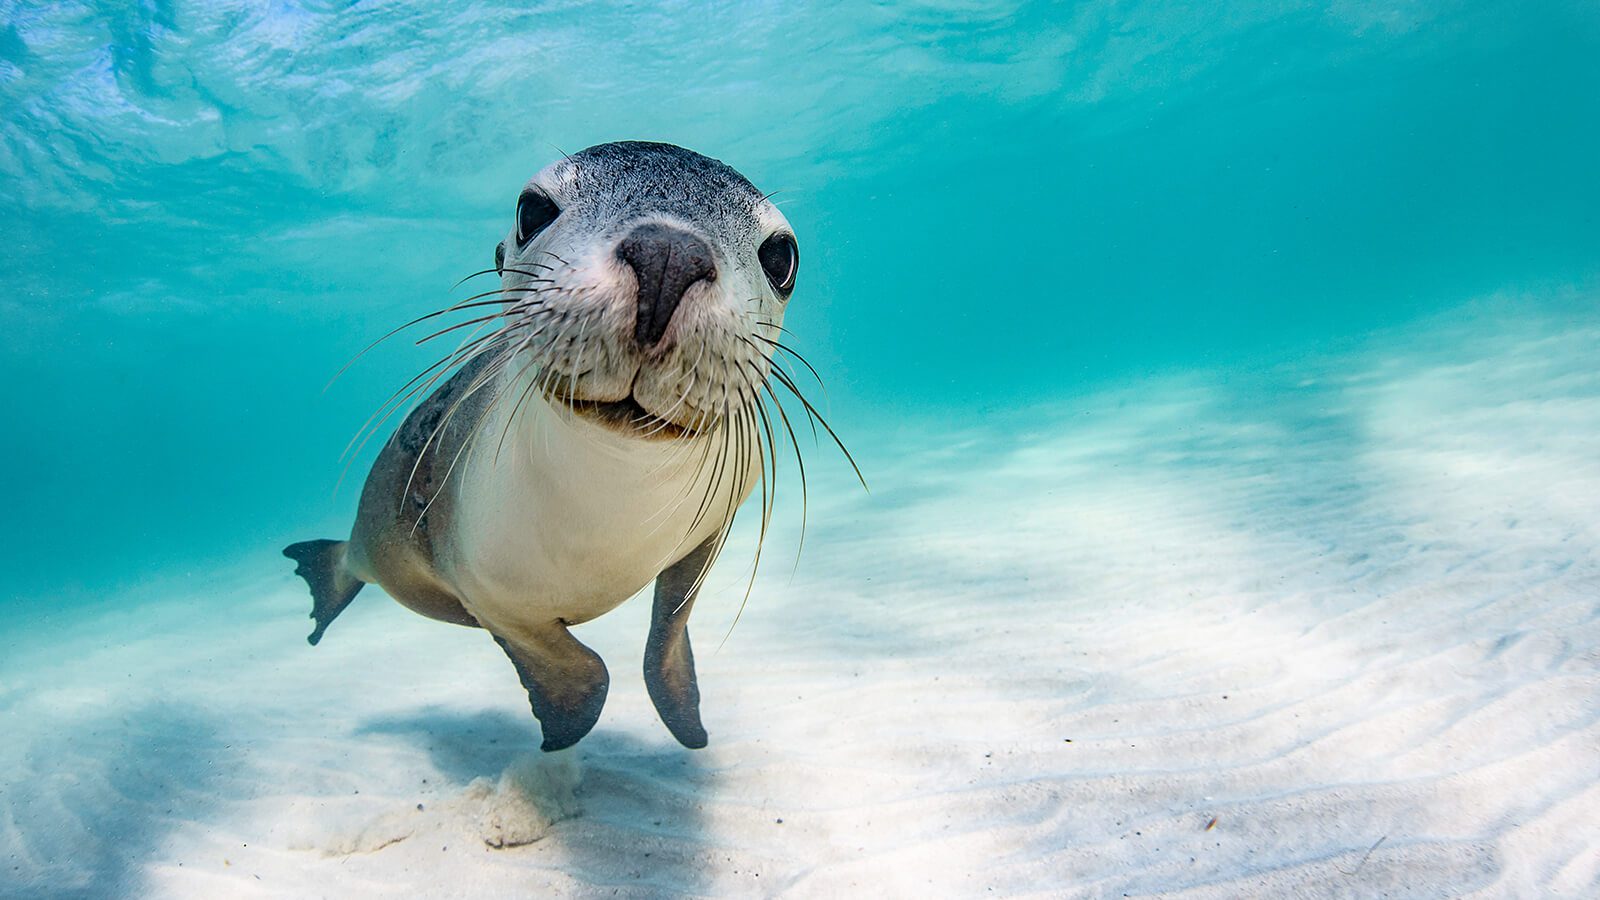 A playful sea lion looks at its reflection in Brooke's camera. - by Brooke Pyke, in Western Australia. 